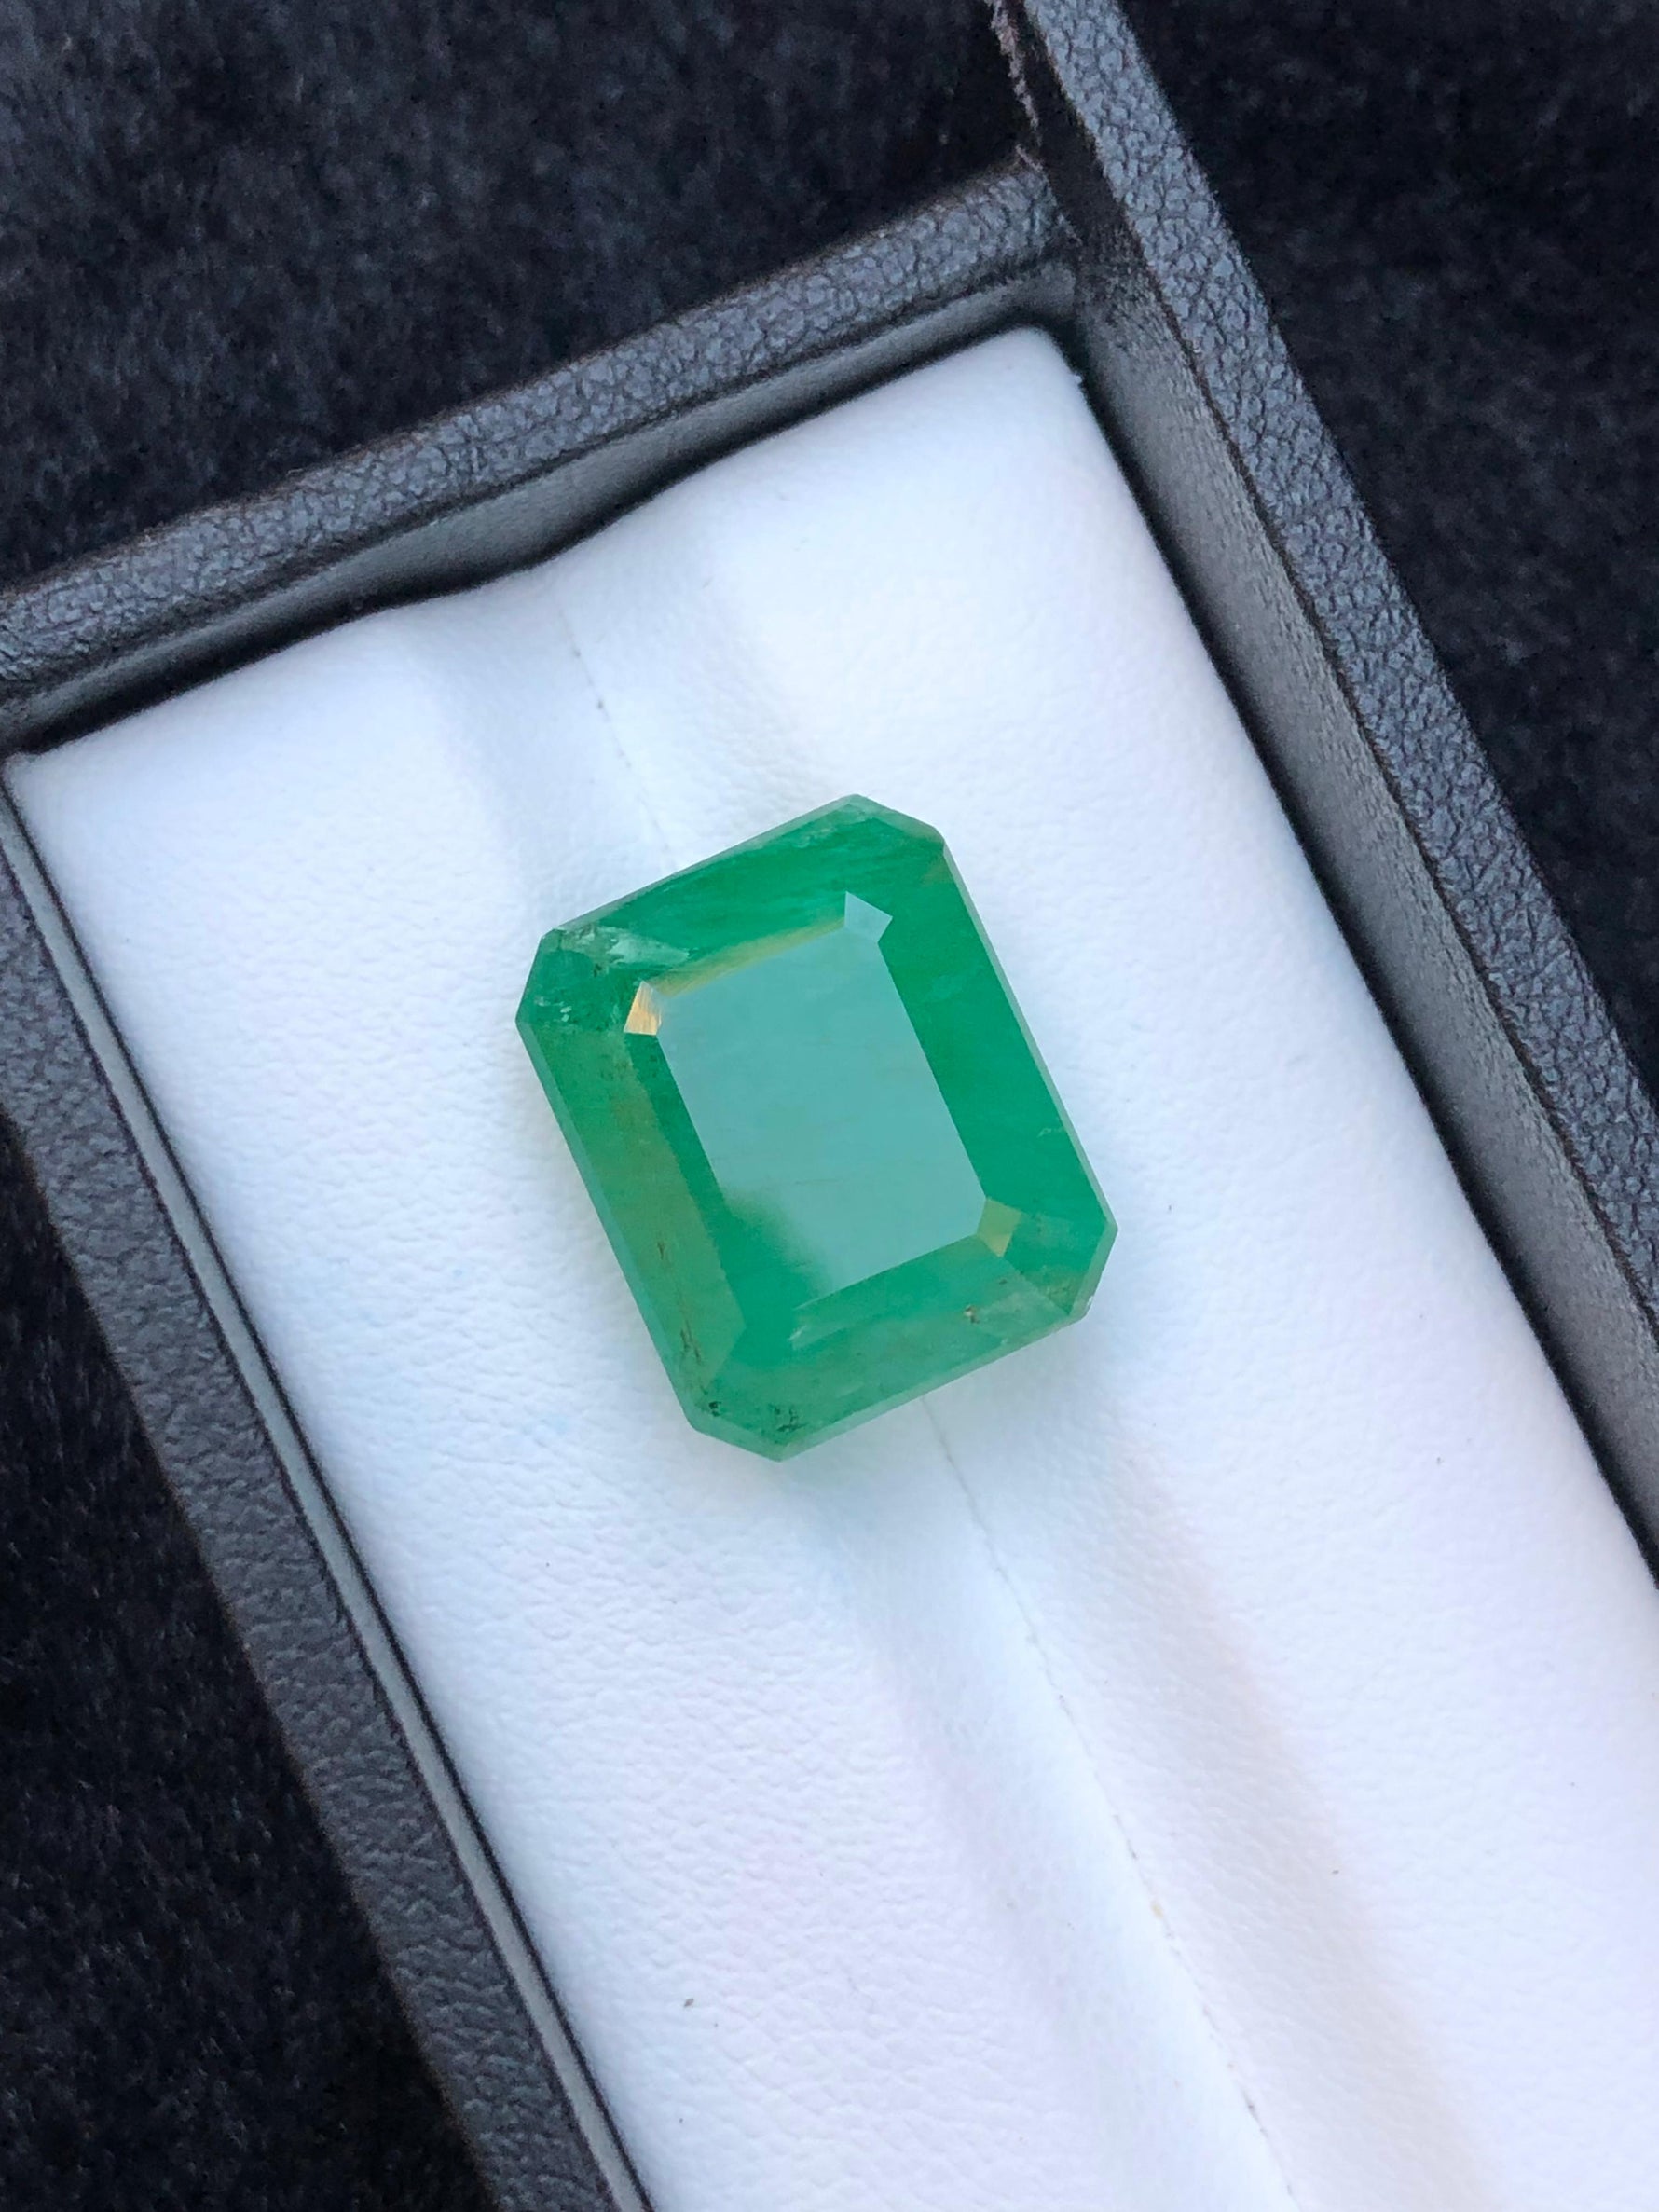 You May Like This Sawat Emerald Stone.